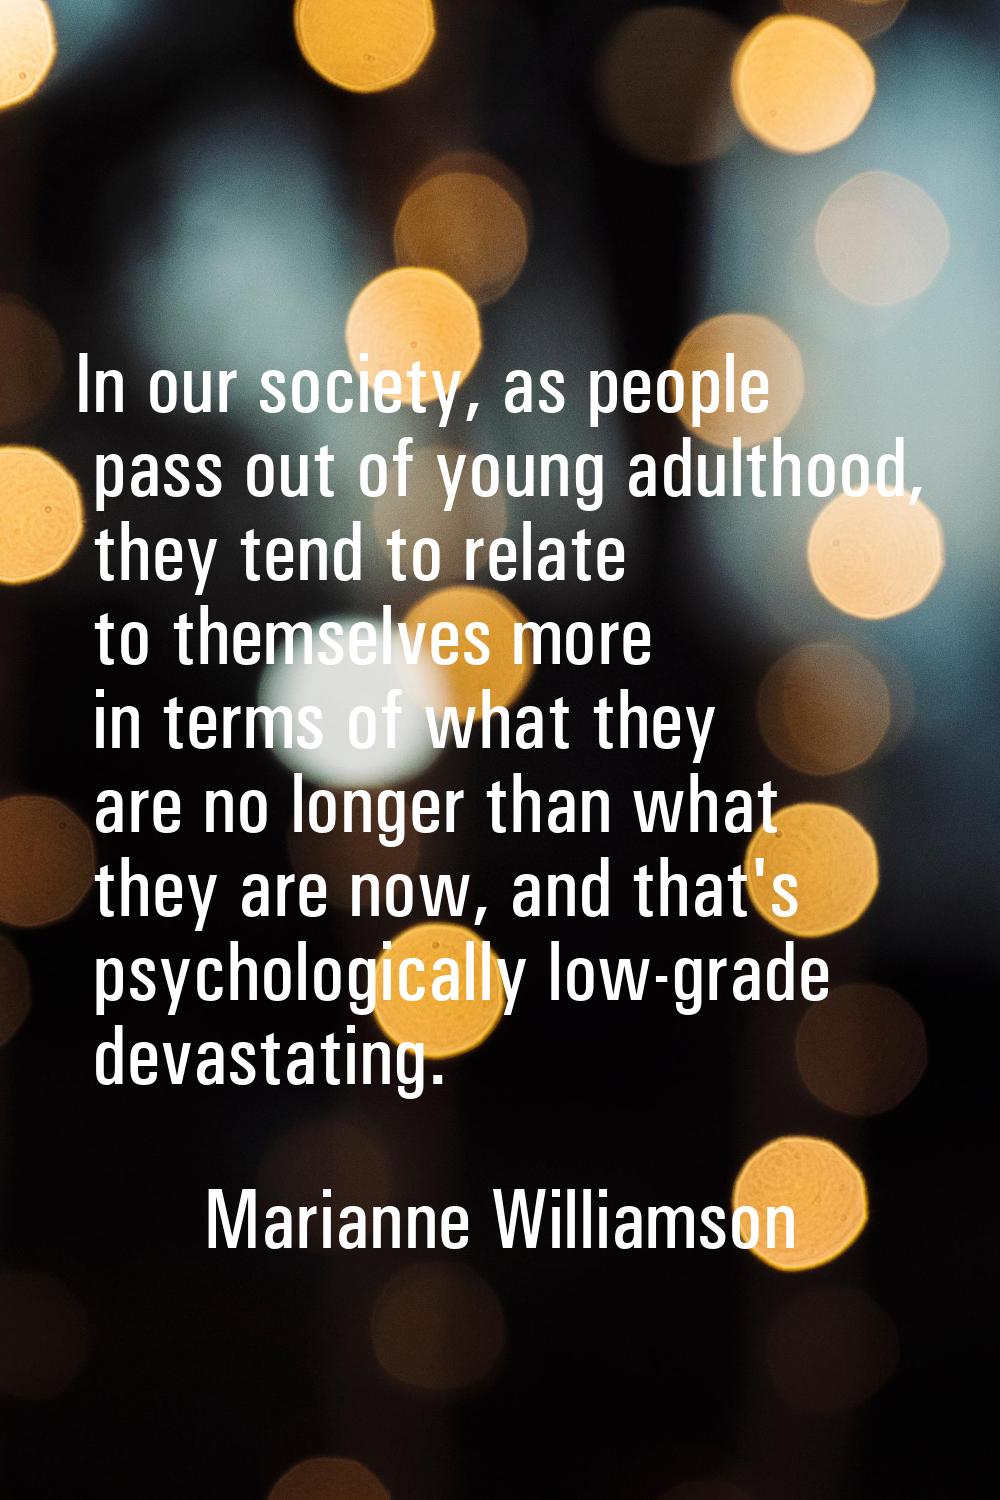 In our society, as people pass out of young adulthood, they tend to relate to themselves more in te